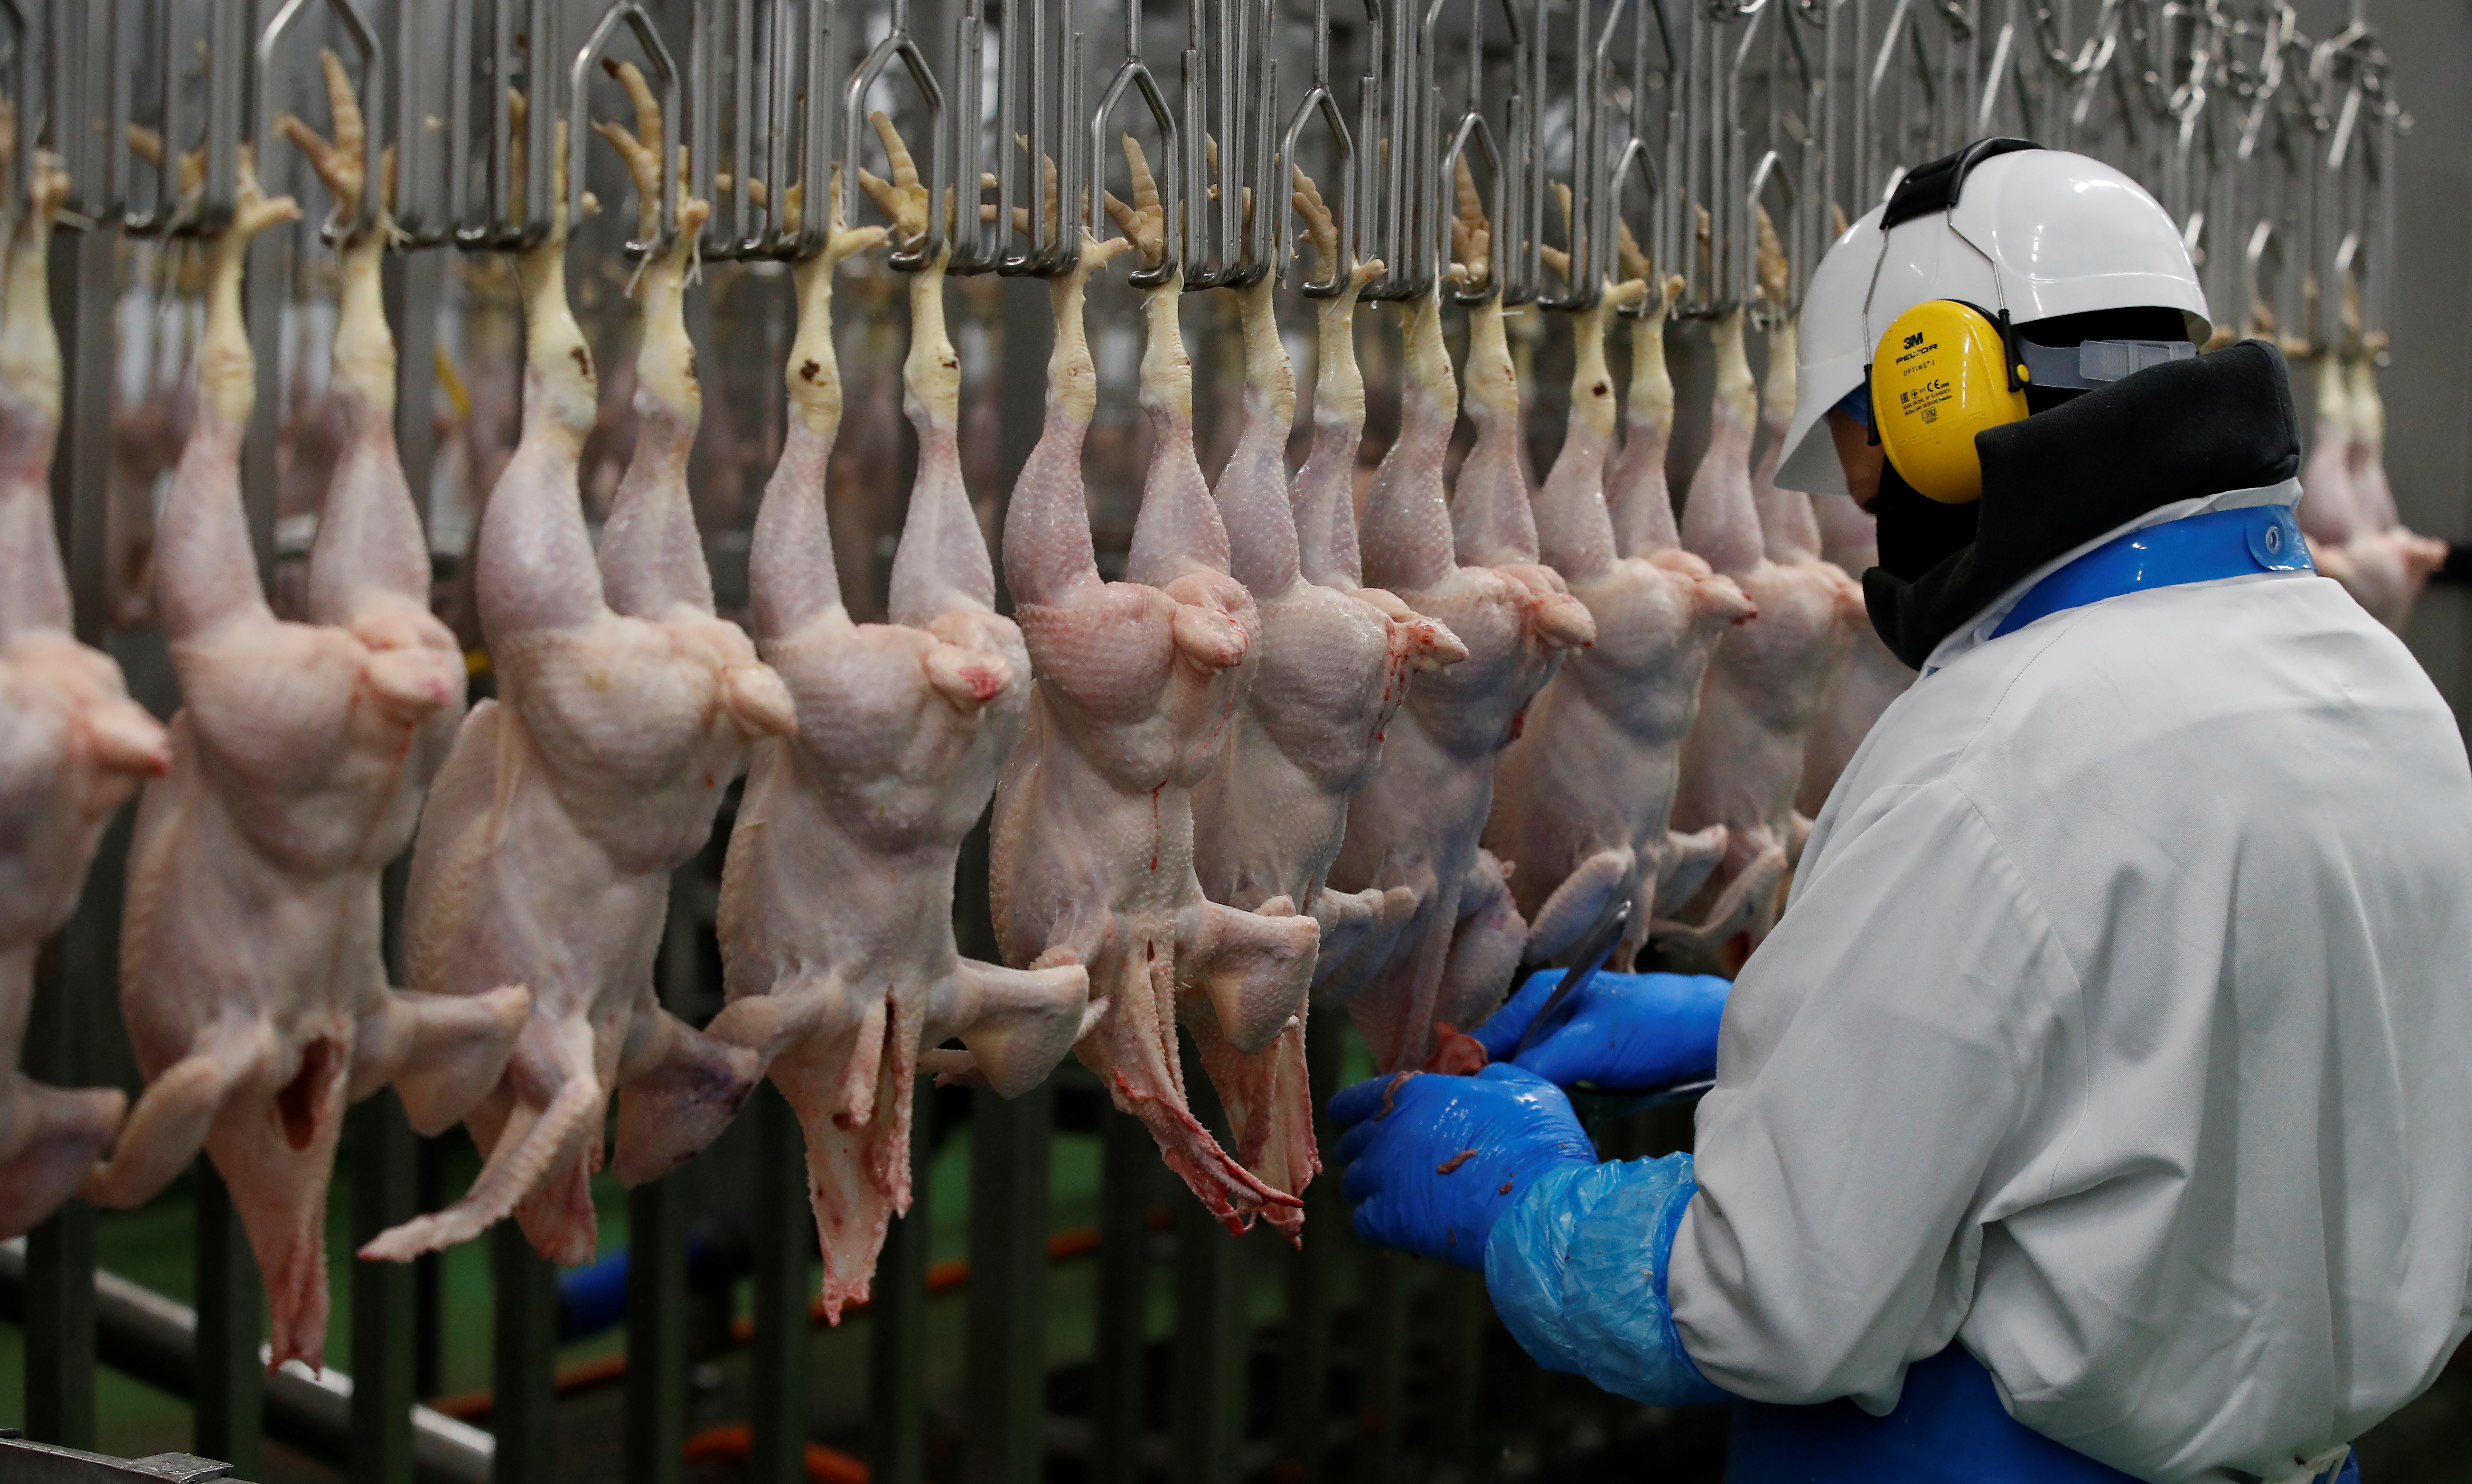 U.K. Supermarkets Rejecting Chlorinated Chicken Is Not a Big Trade